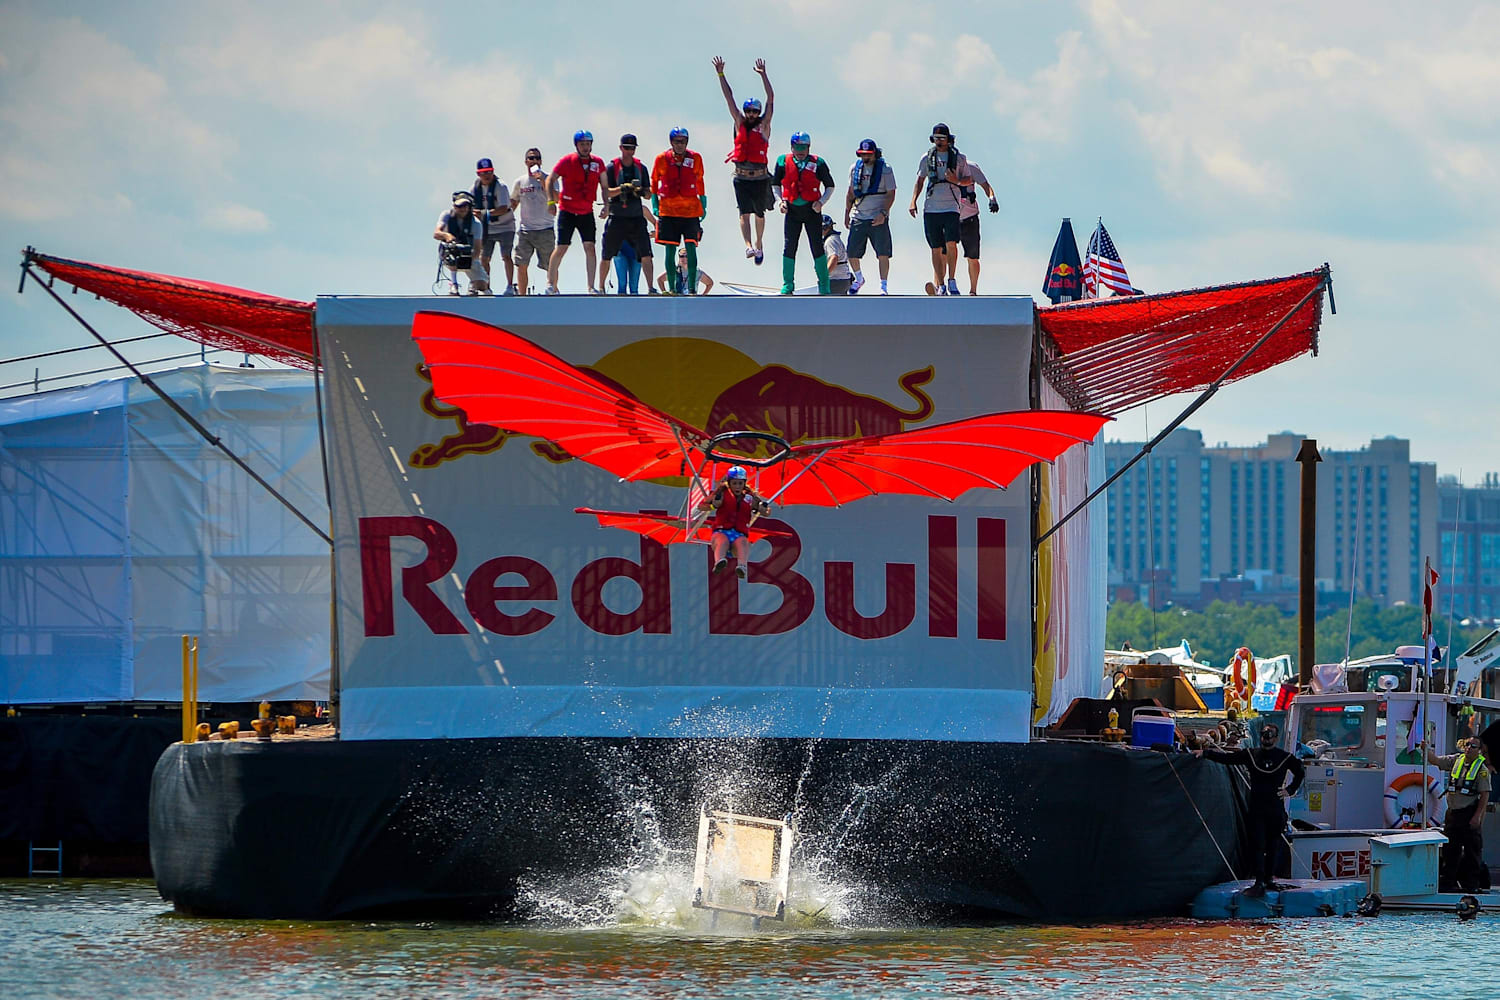 5 steps to achieve Red Bull Flugtag enlightenment